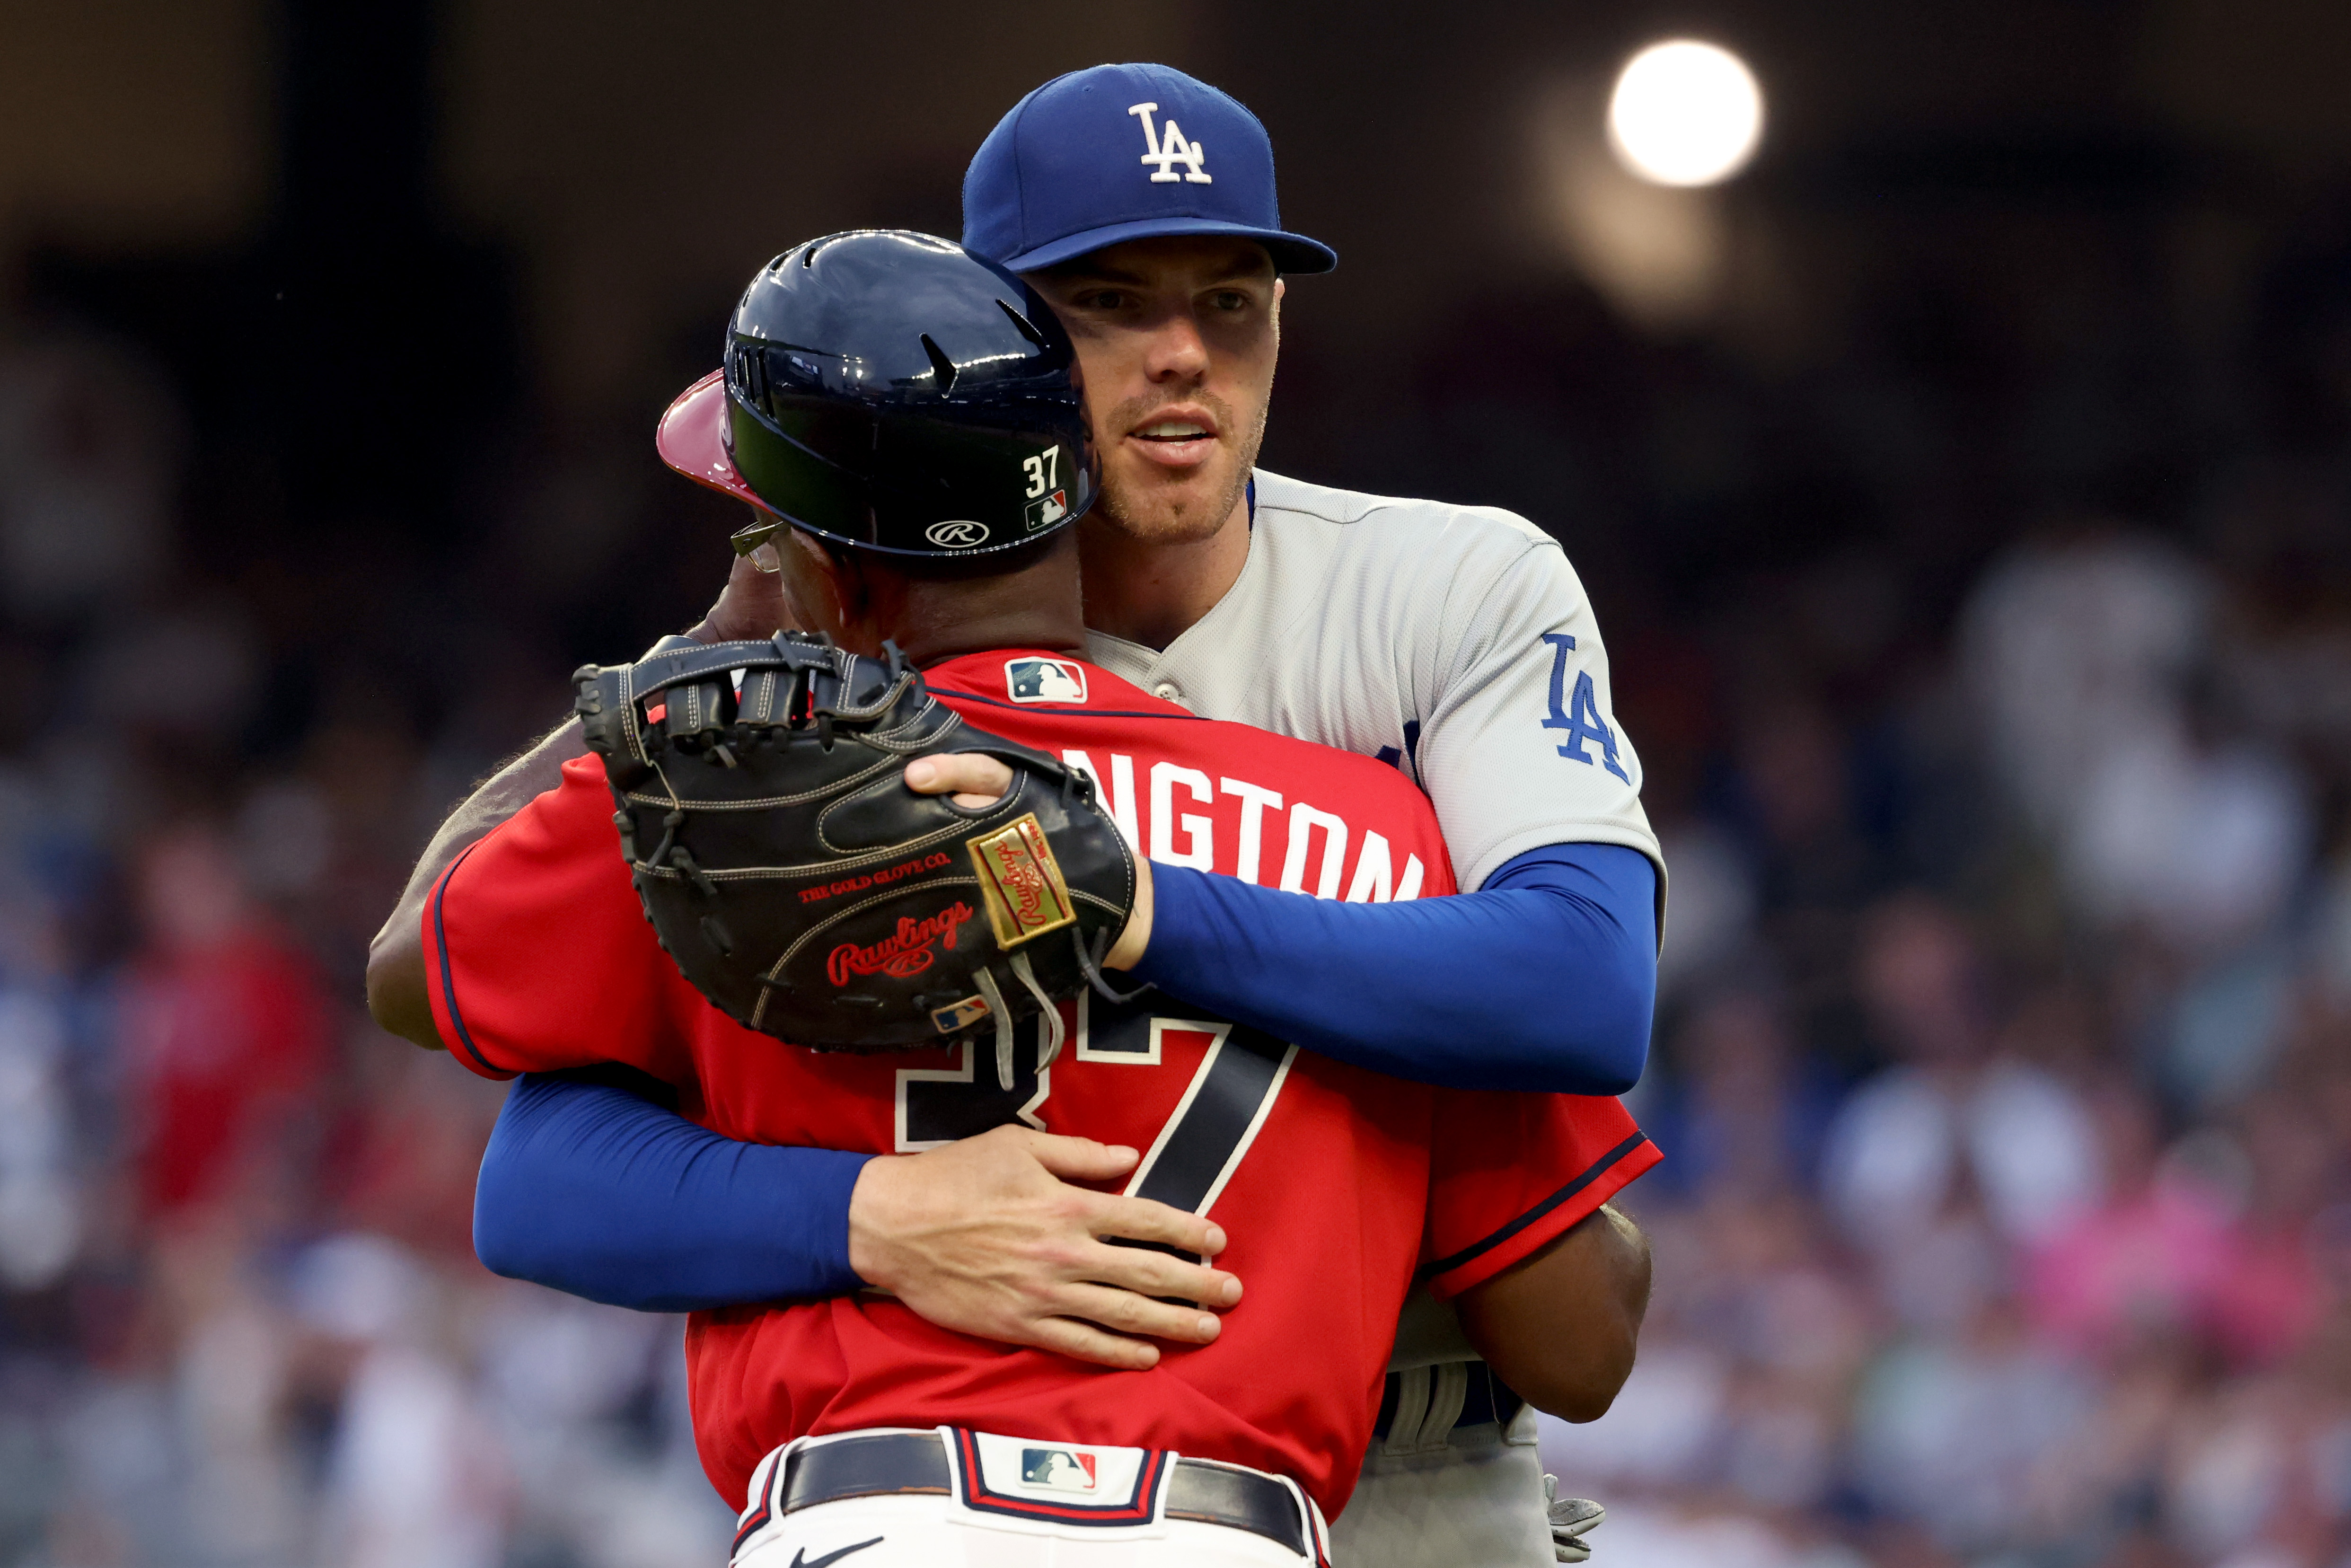 Freddie Freeman agrees to multi-year contract with Dodgers